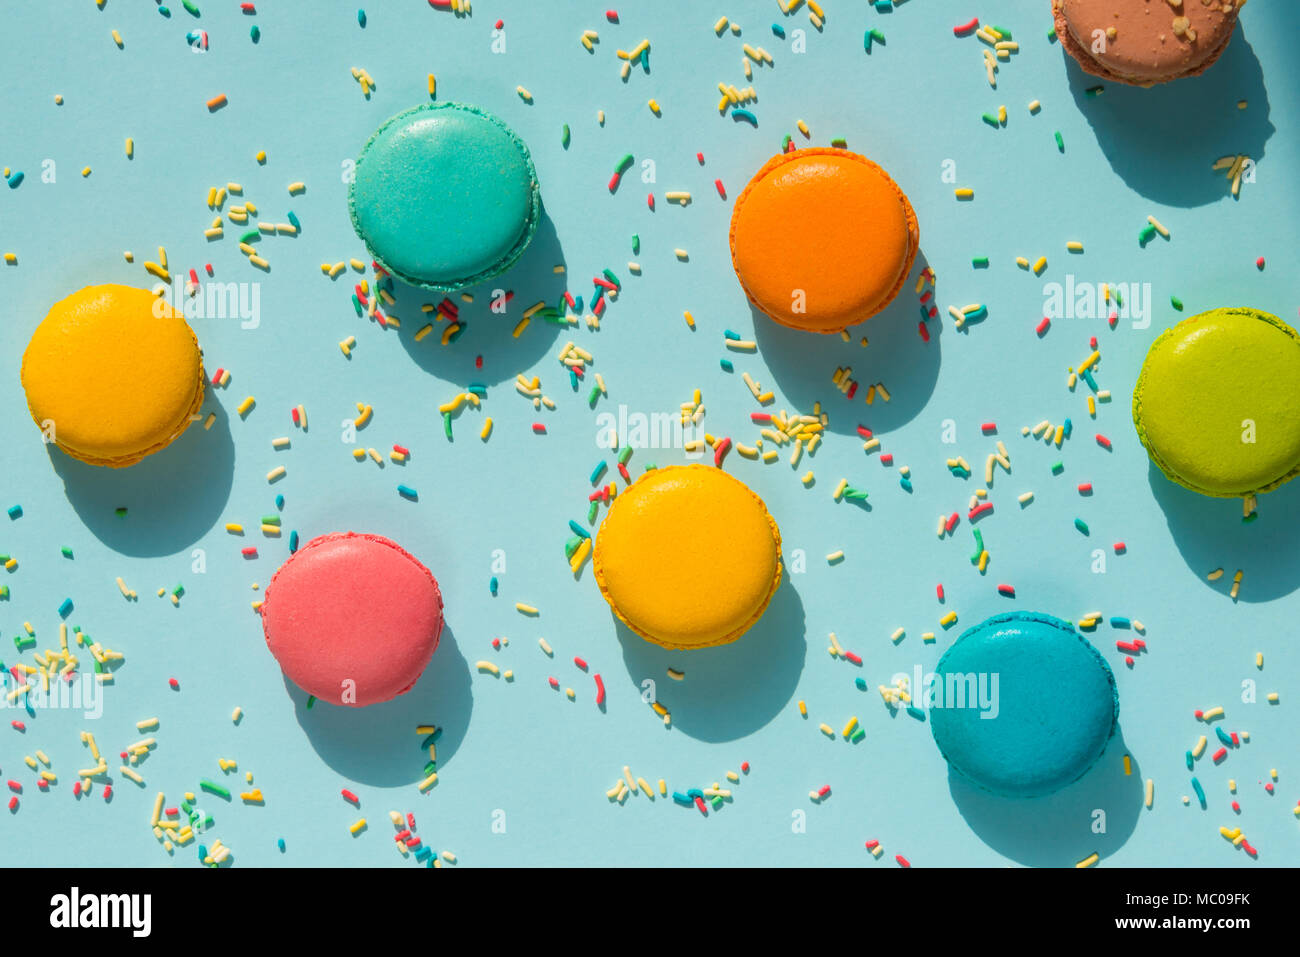 Top view of scattered colorful macaroons and sugar sprinkles over blue background. Abstract food background. Stock Photo